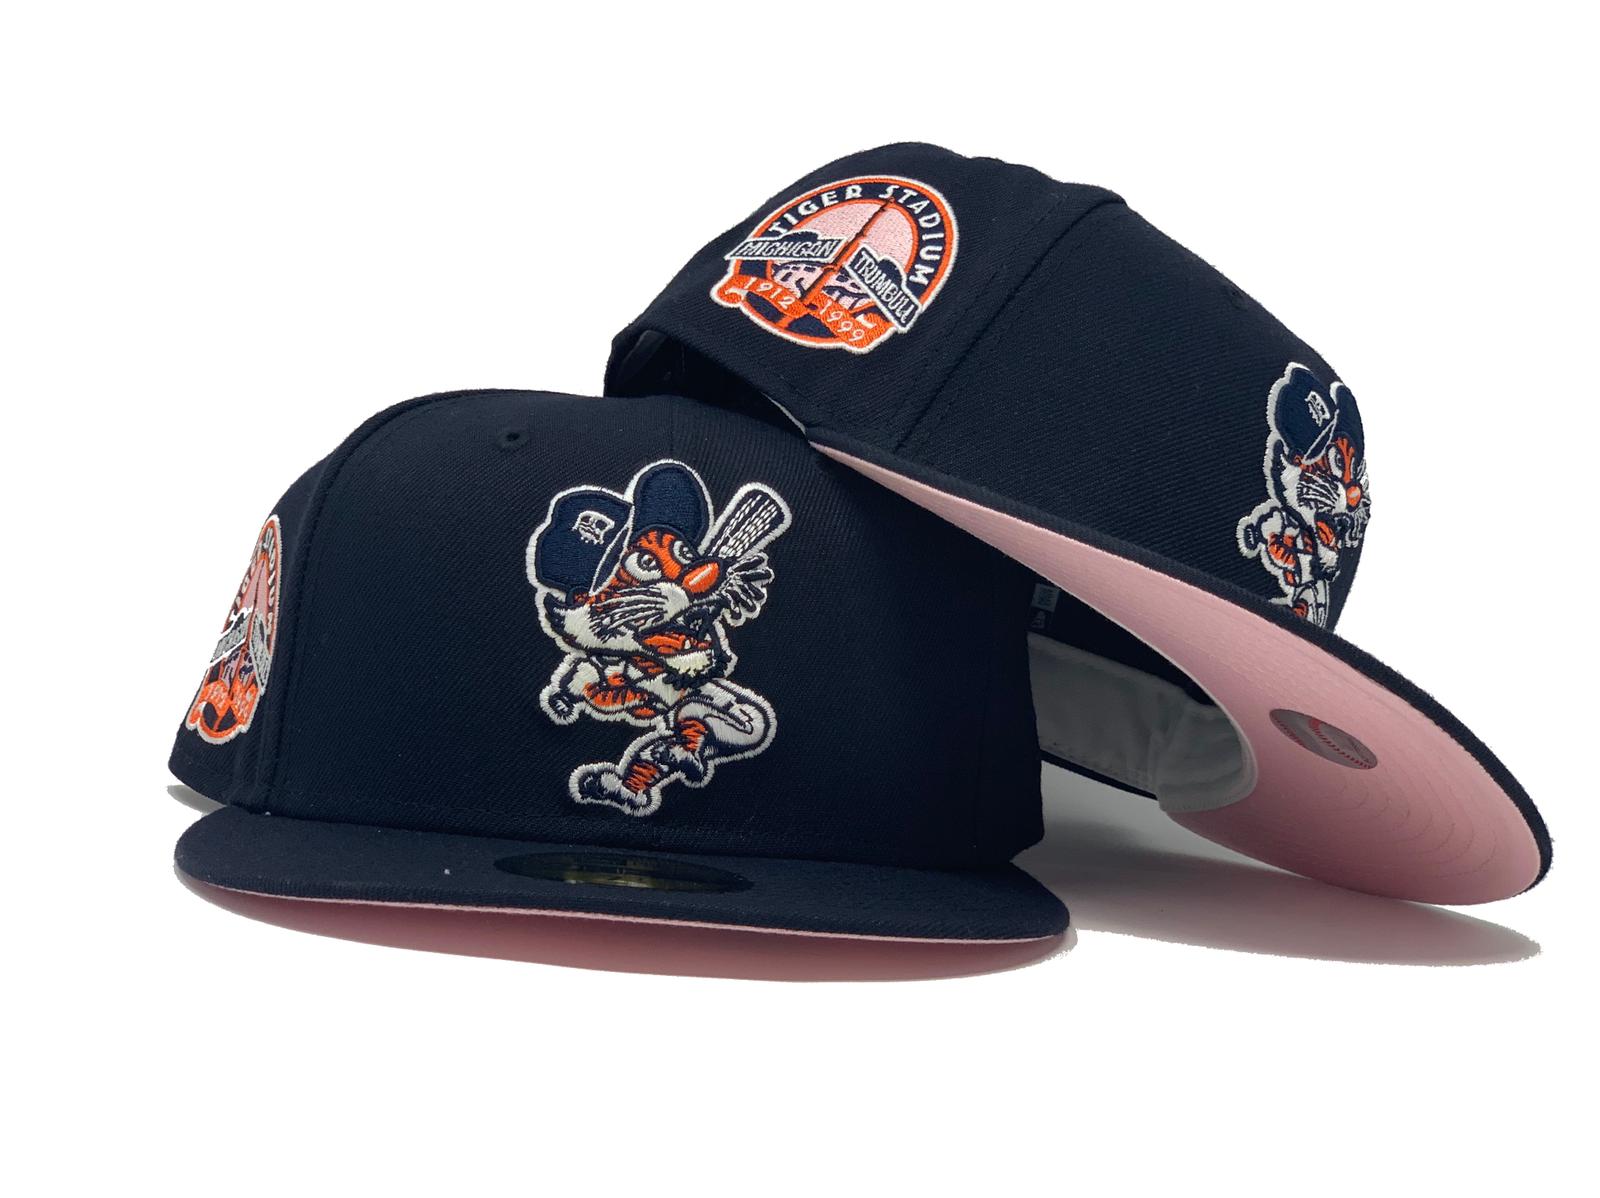 Detroit Tigers New Era Olive Undervisor 59FIFTY Fitted Hat - Pink/Blue